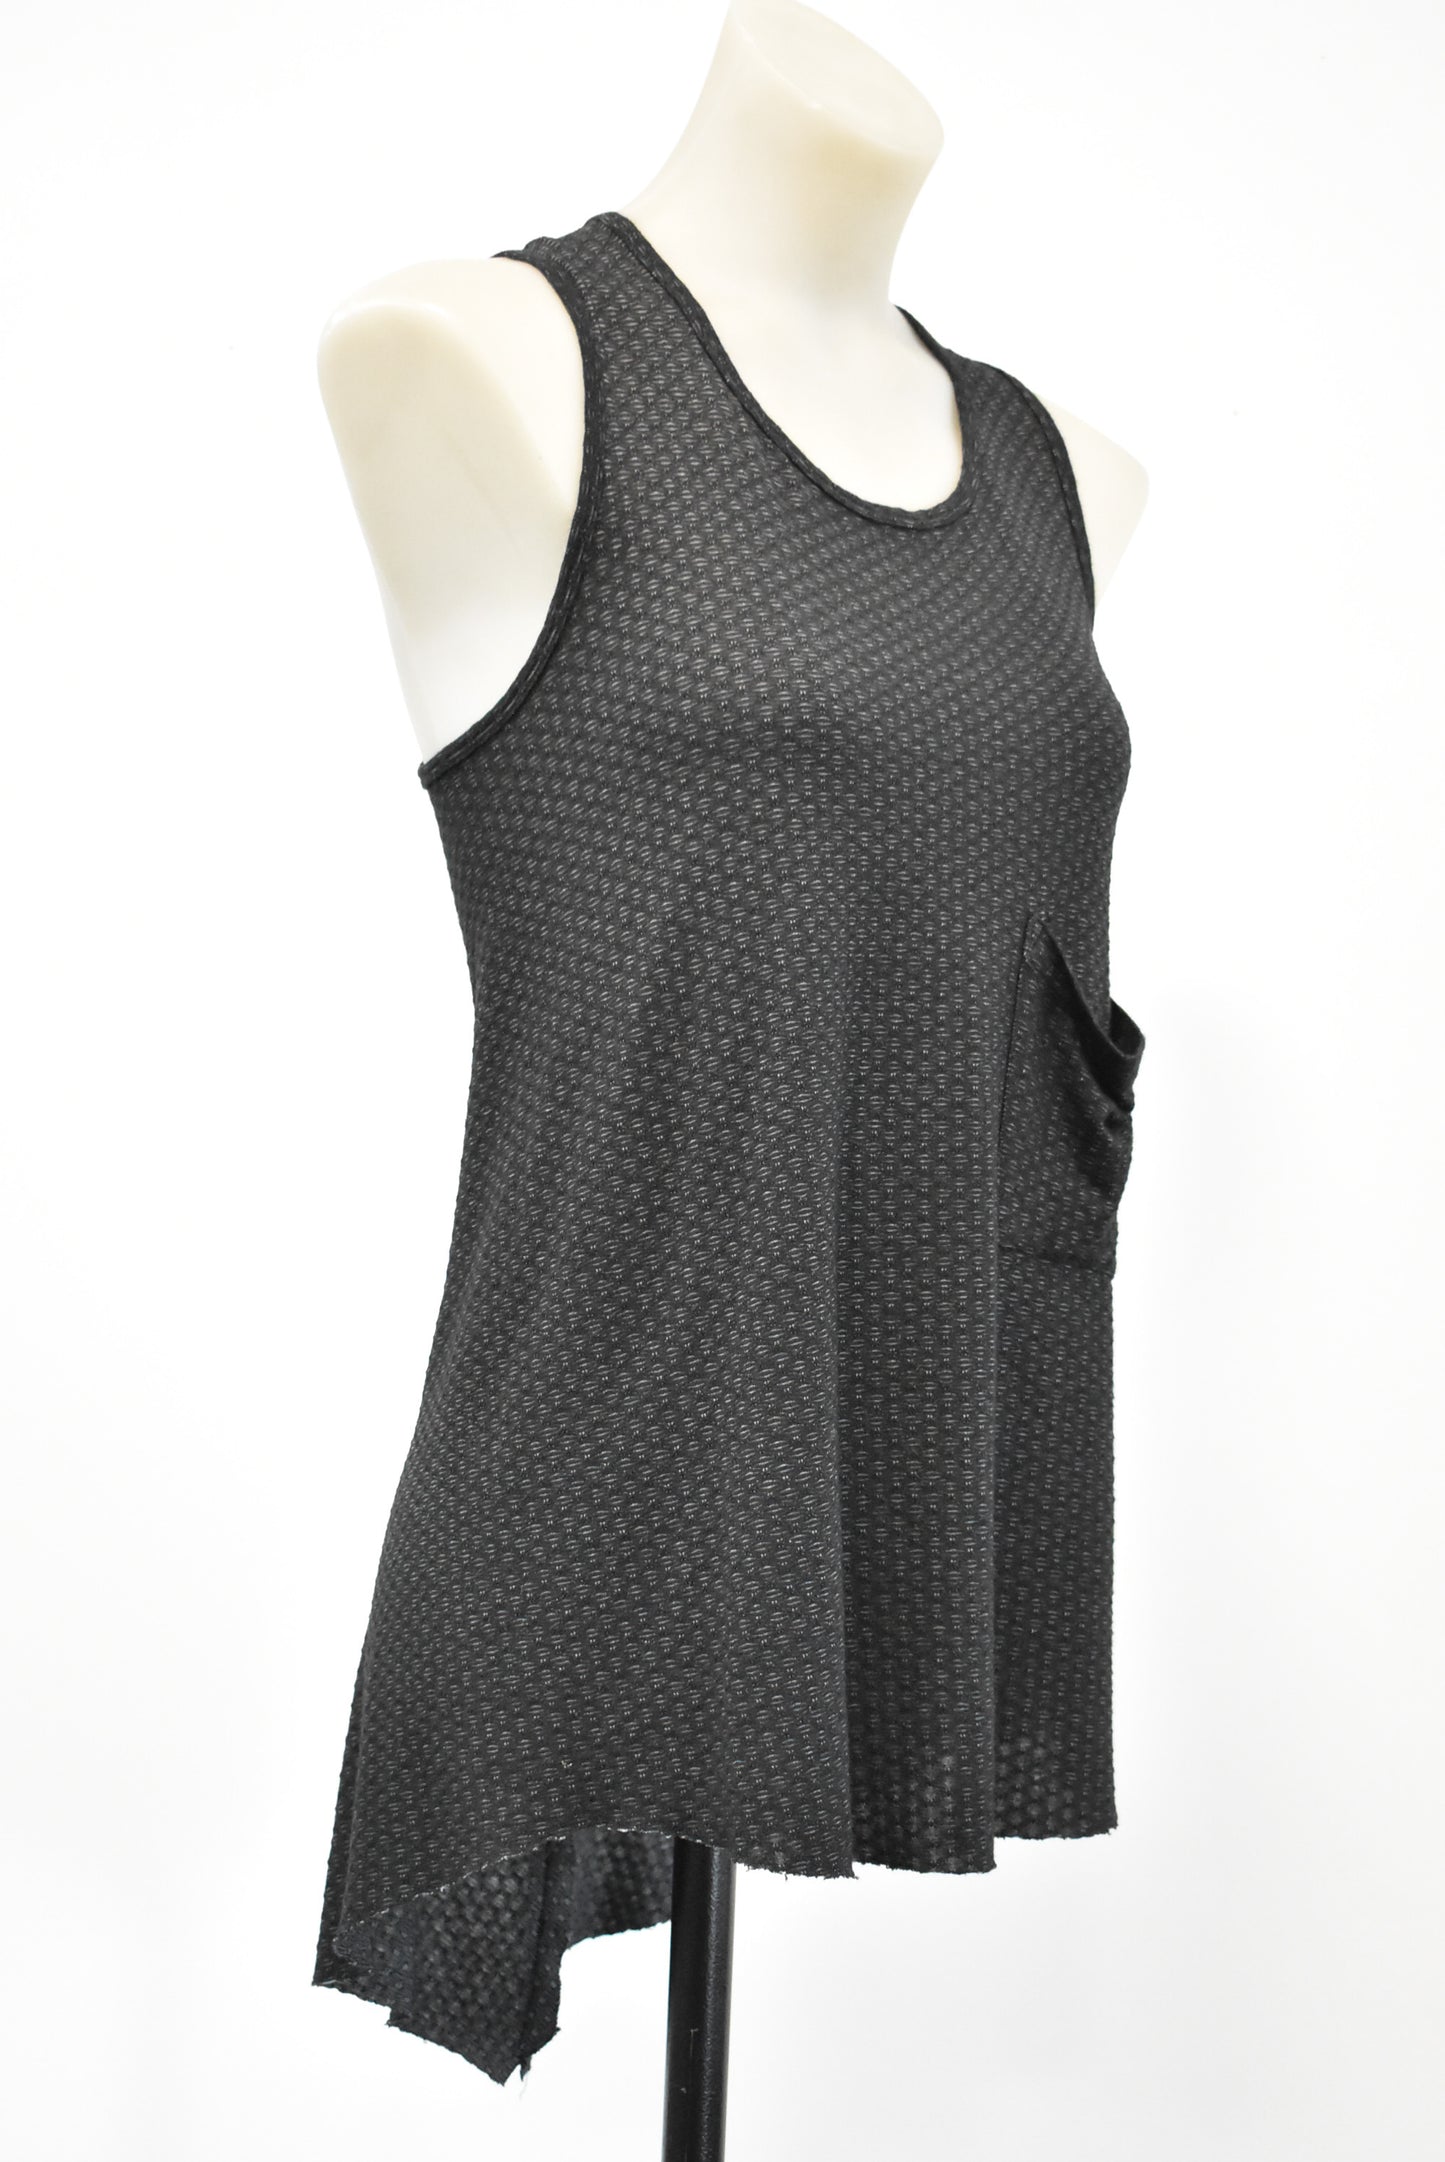 Nom*D Singlet with cutaway back, S